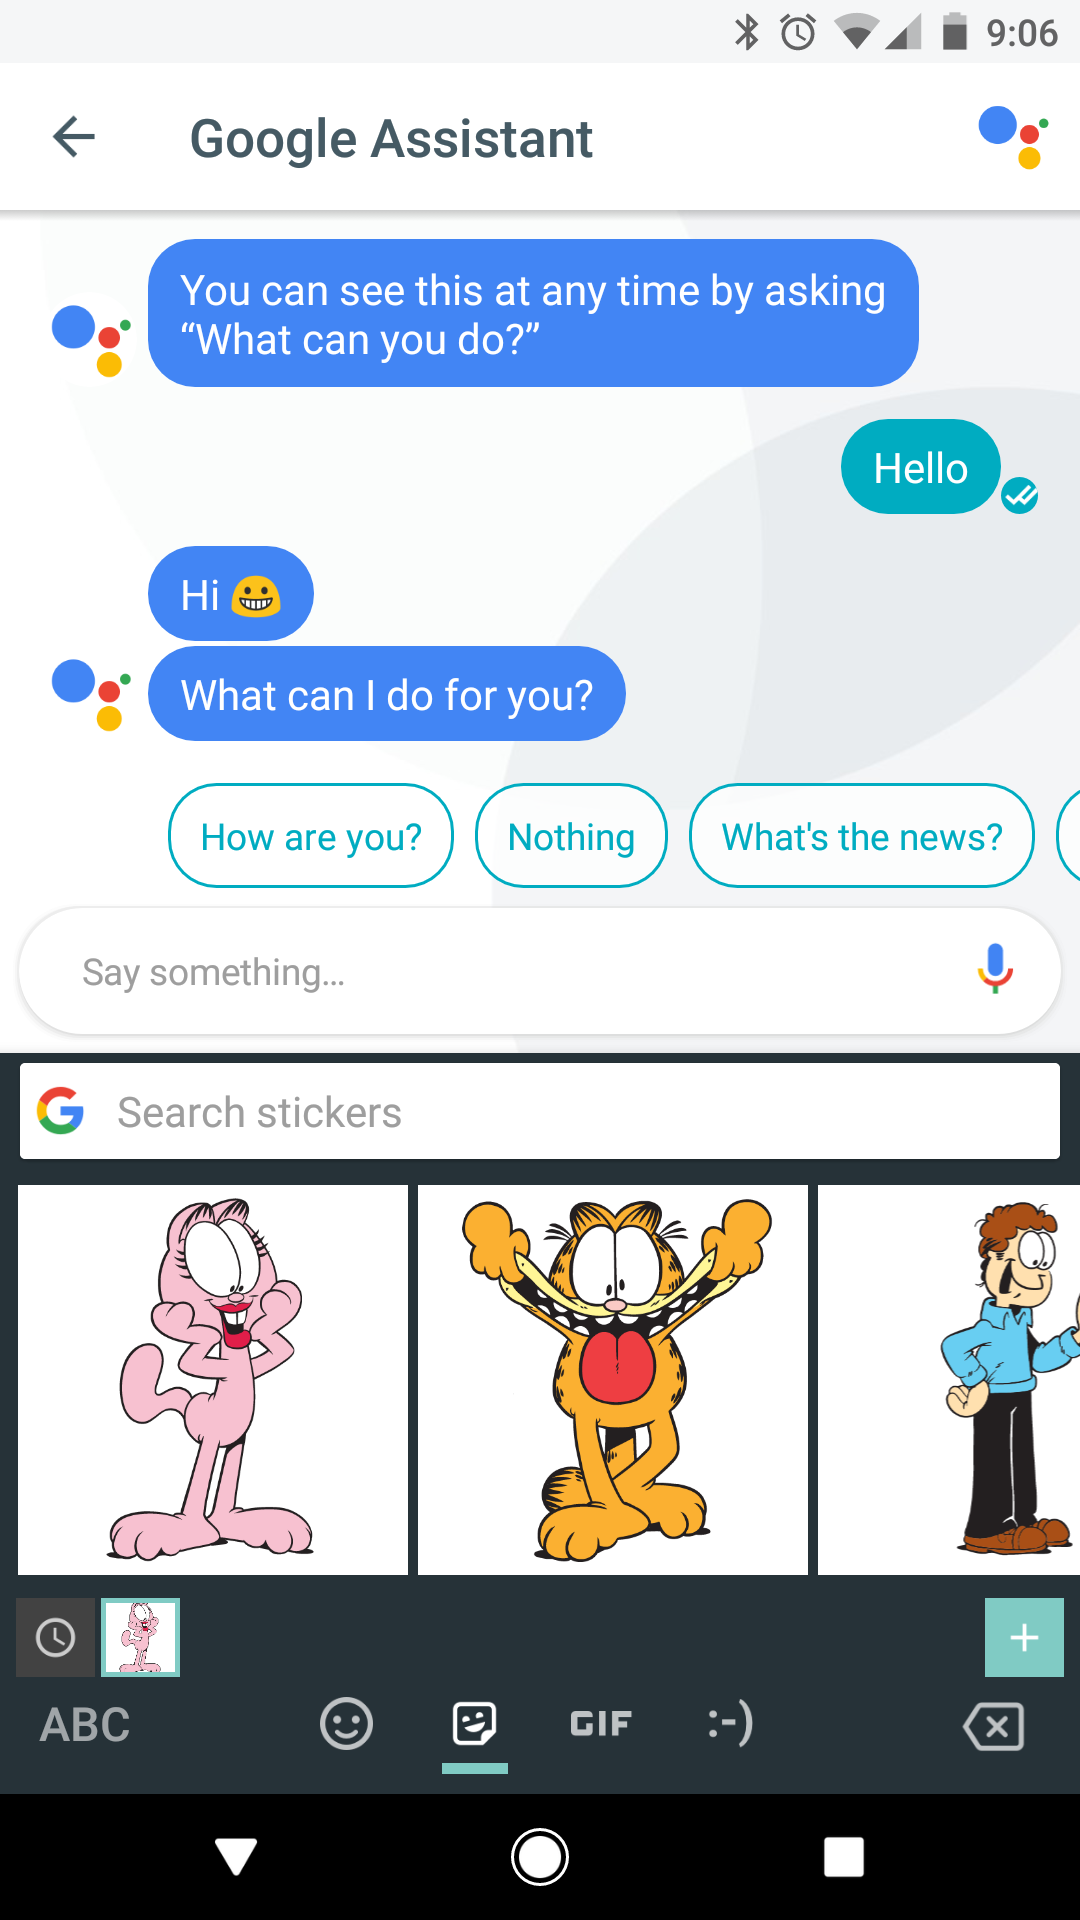 gboard 6.5 beta features bitmoji and sticker integration along with some tweaks